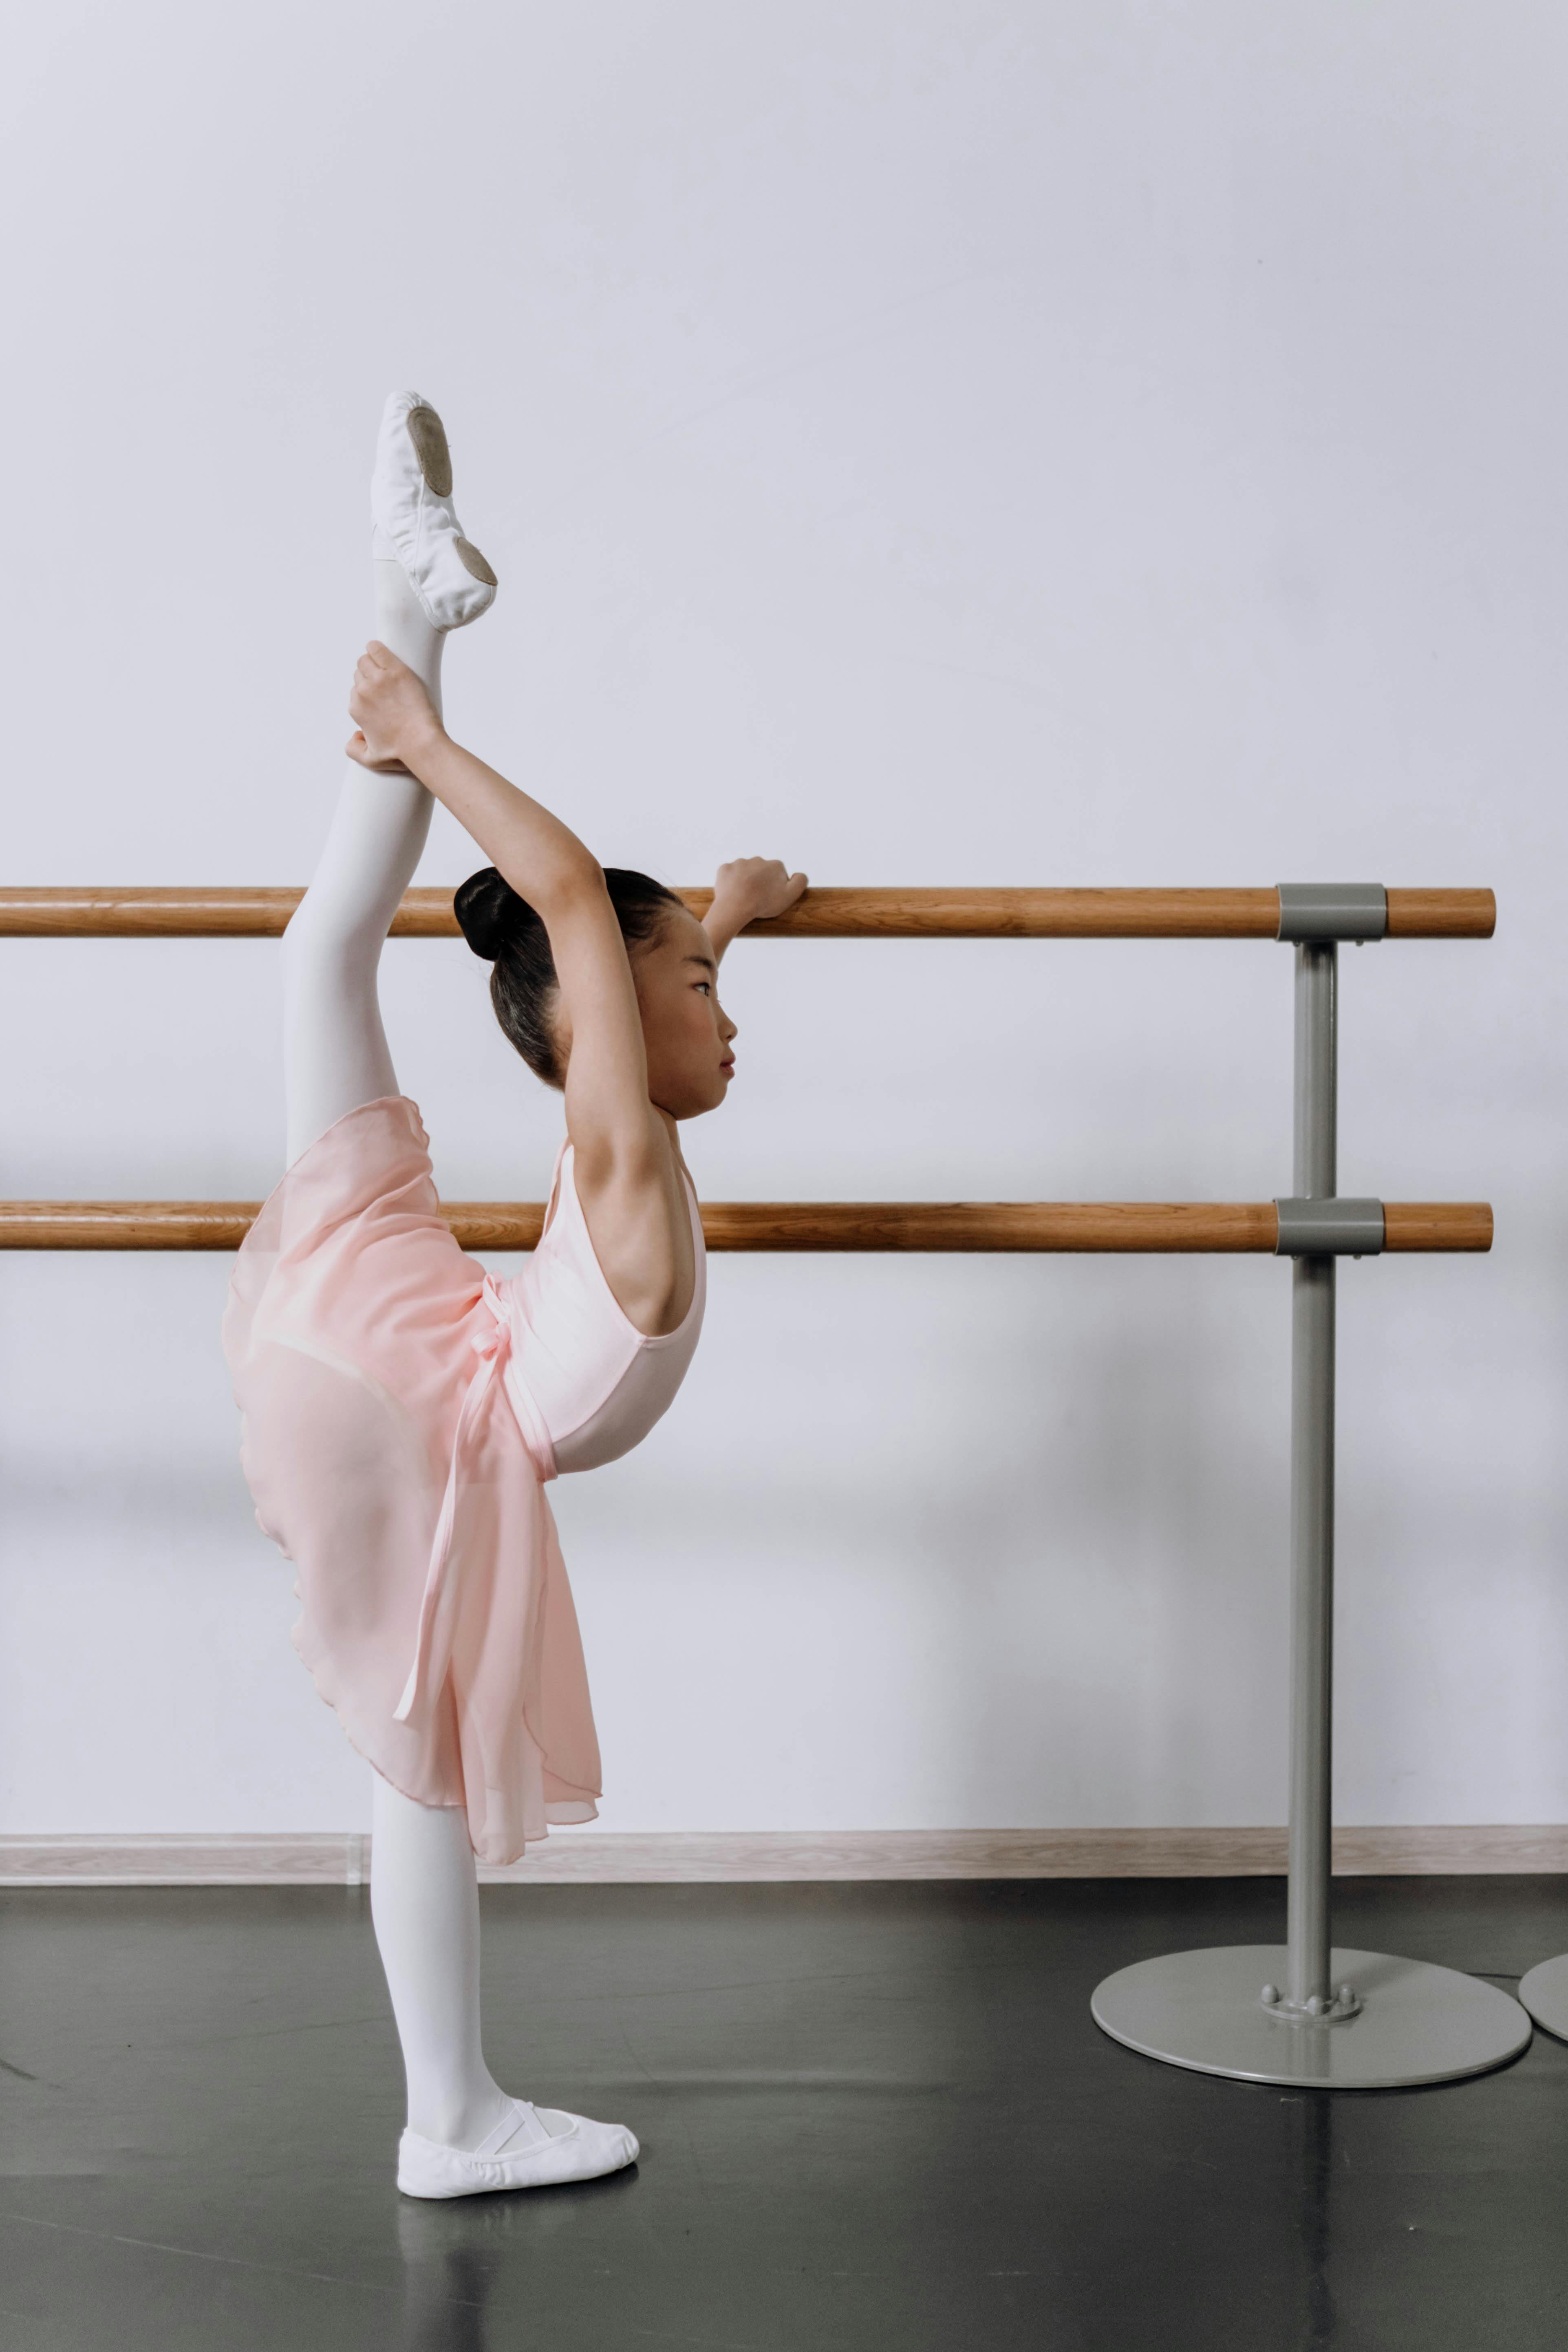 Ballerina & Dance Pose Ideas For Pictures